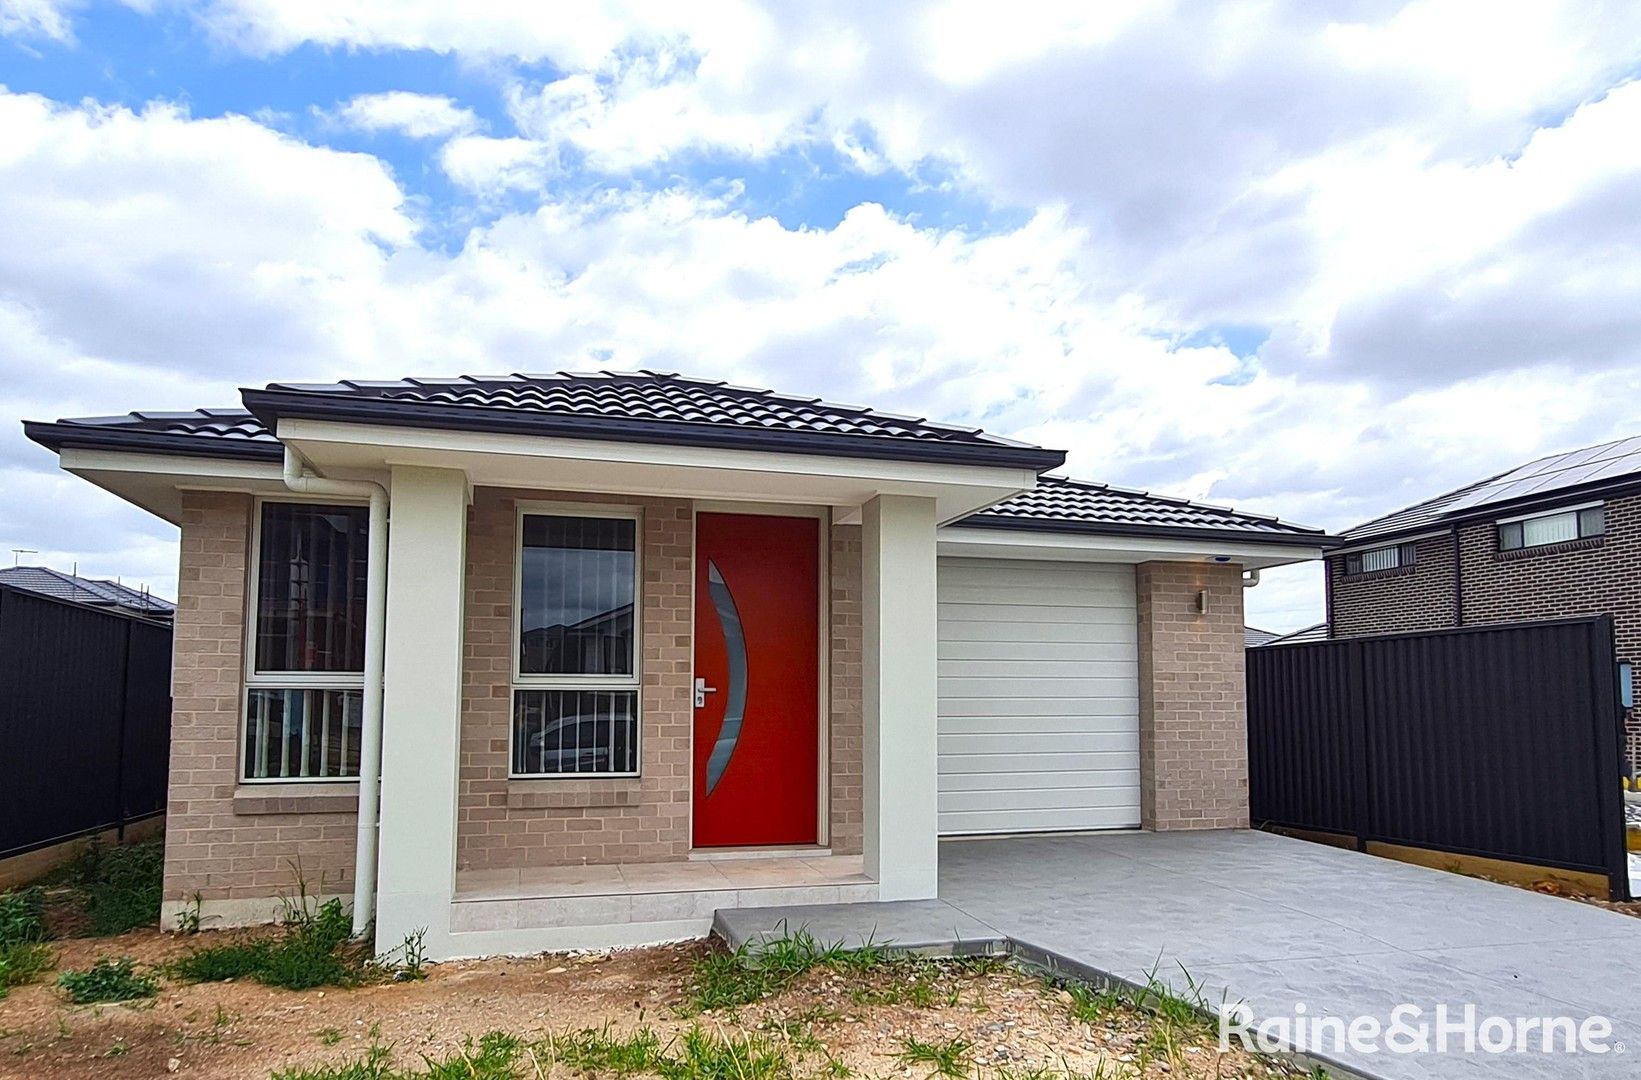 4 bedrooms House in 25 Buduwangung Street AUSTRAL NSW, 2179